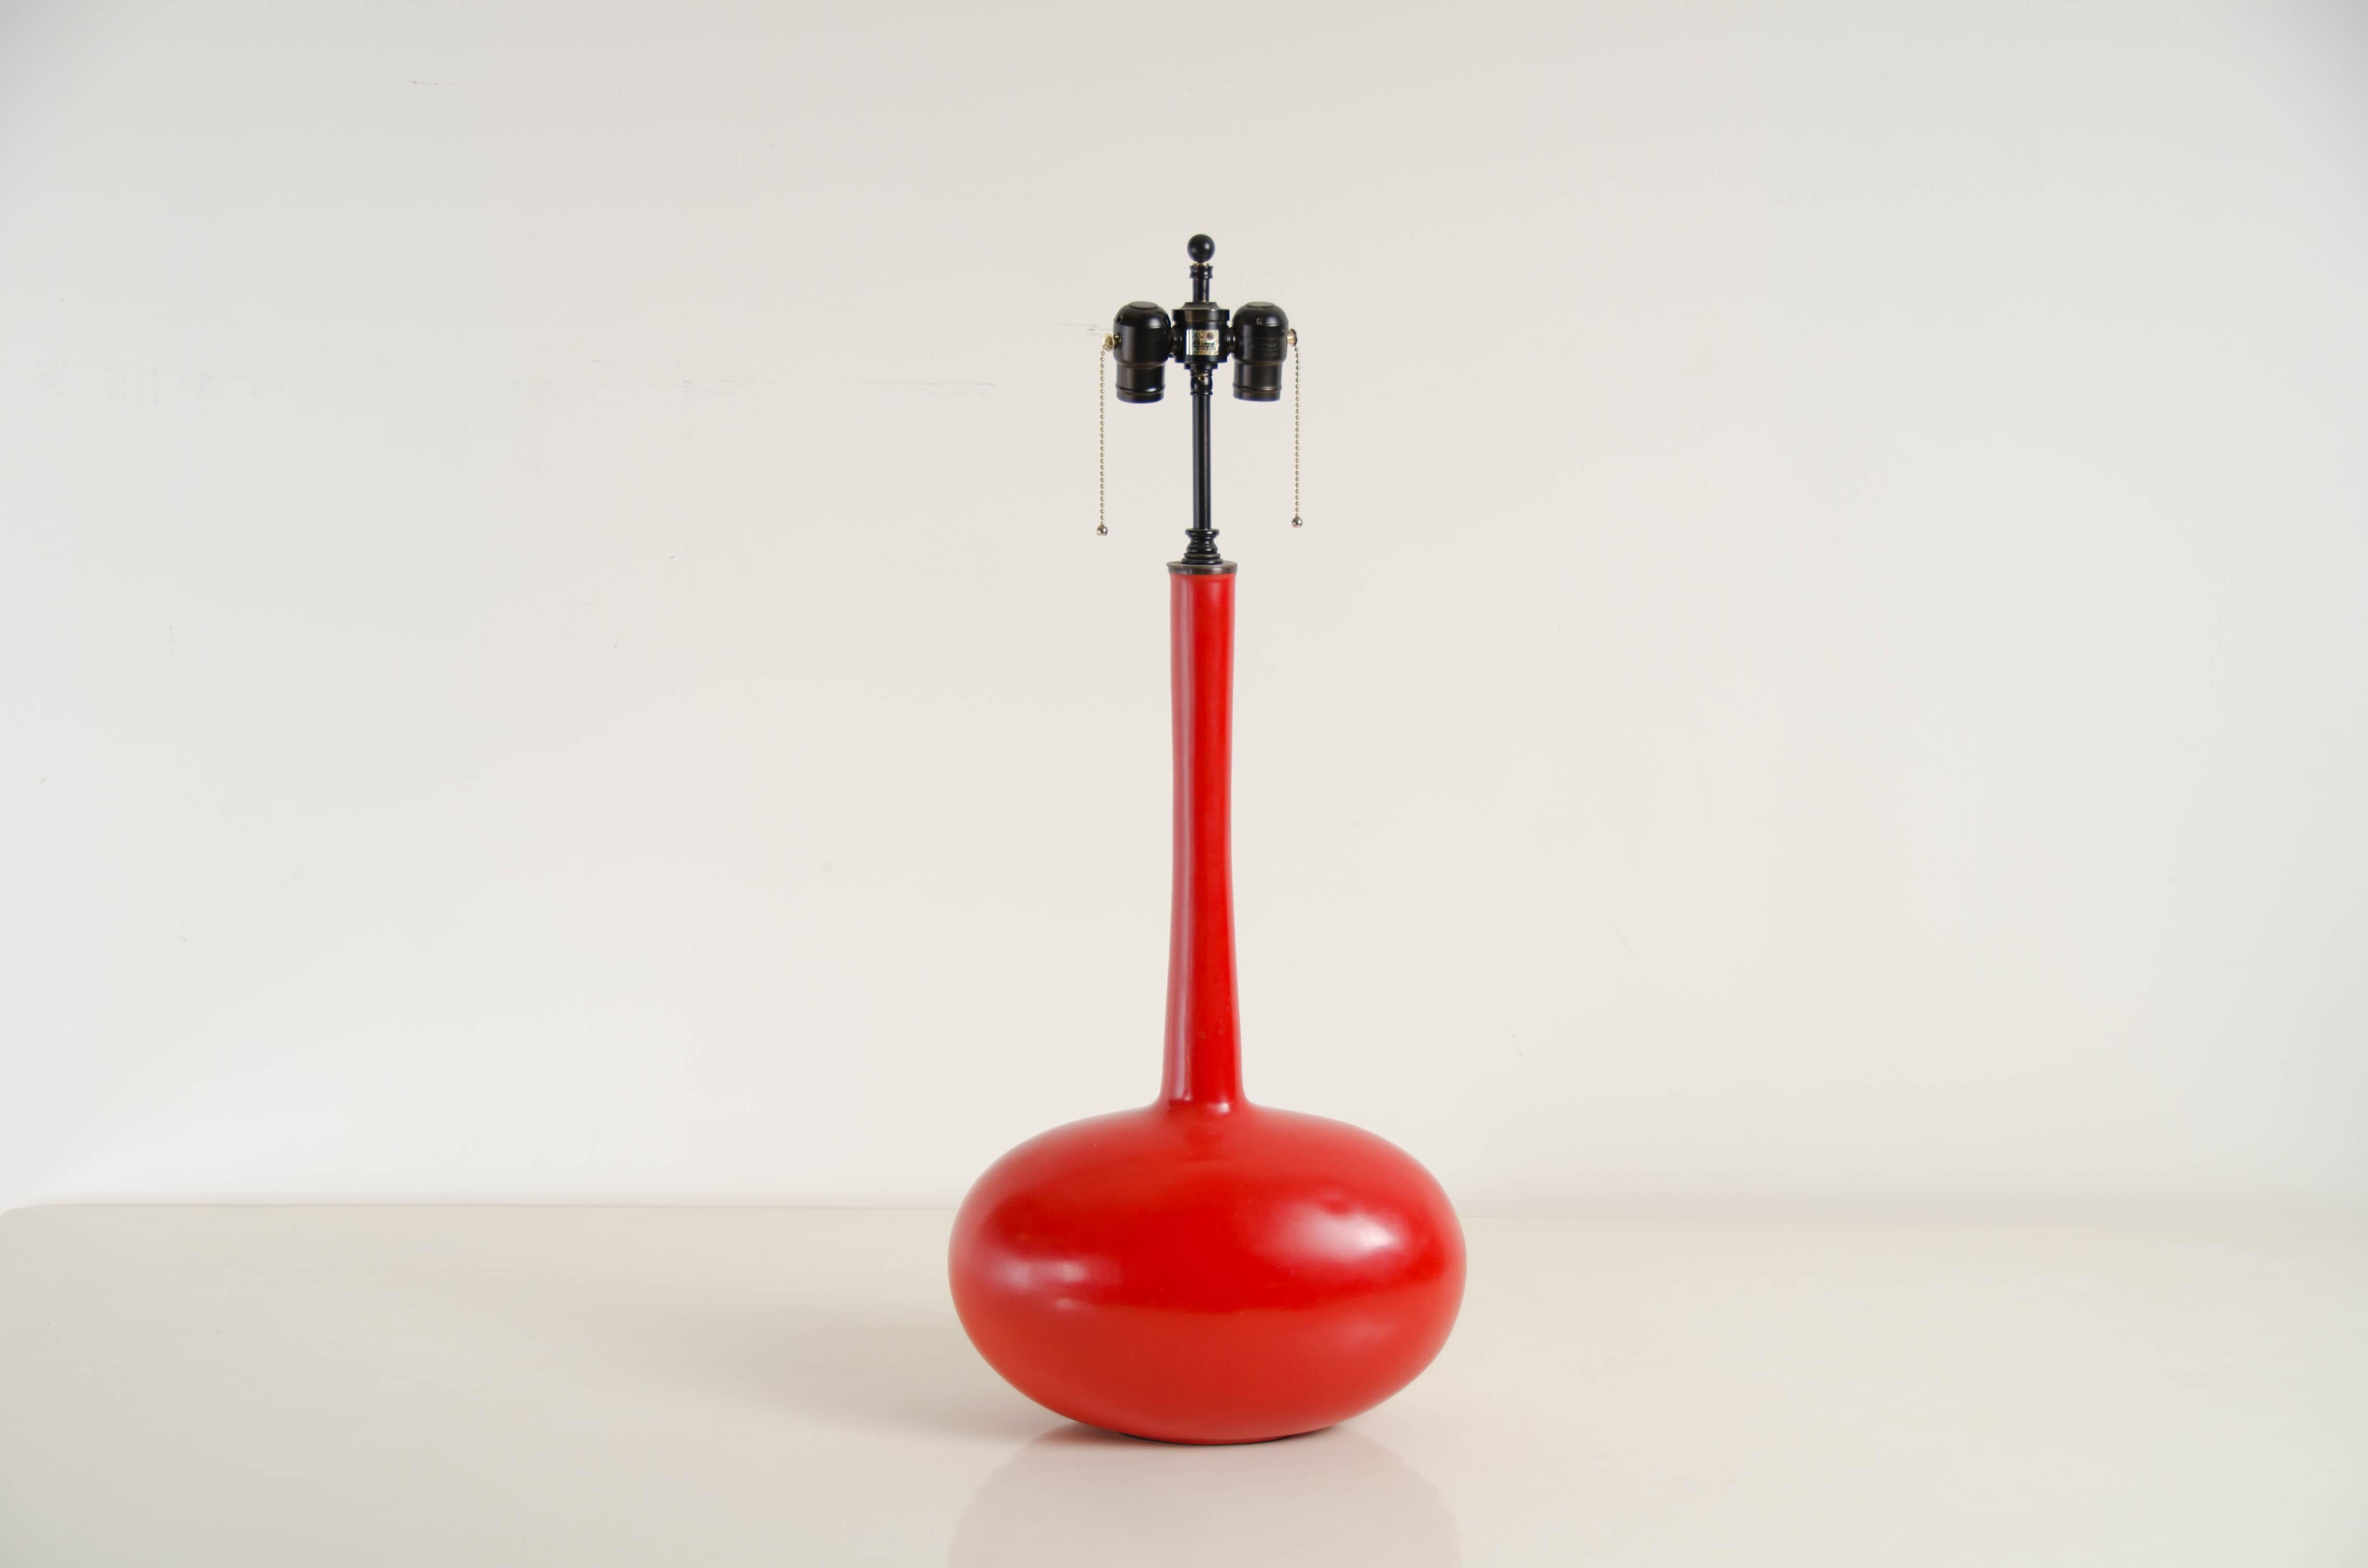 Repoussé Tall Cocoon Table Lamp, Red Lacquer by Robert Kuo, Hand Repousse, Limited For Sale